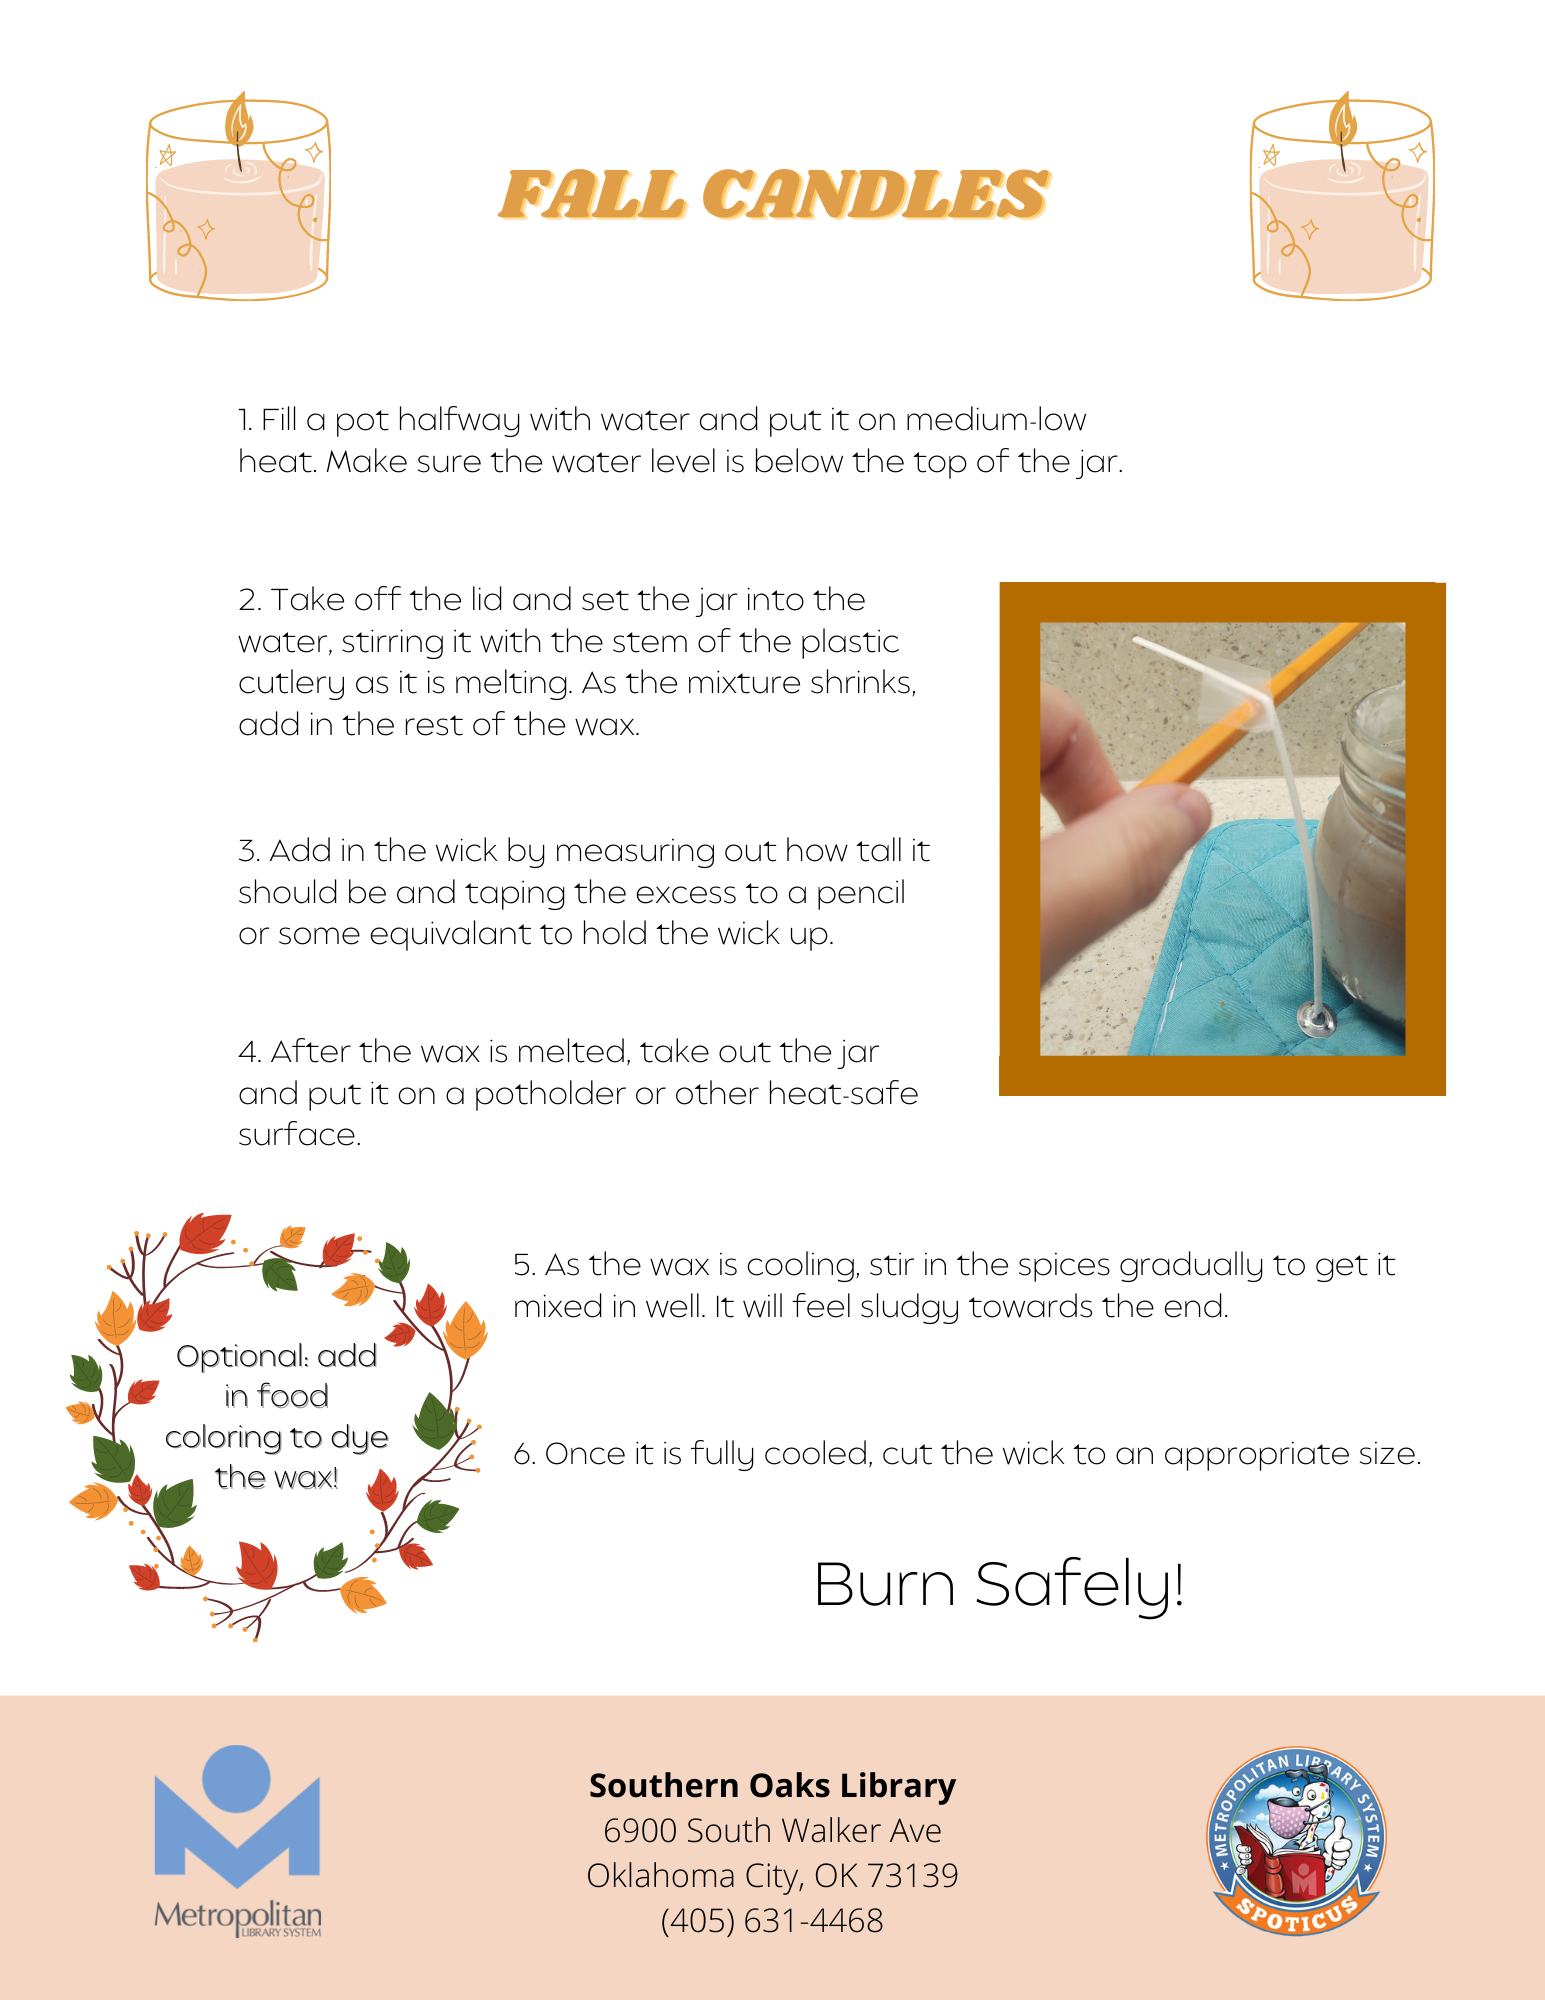 The instructions to make the fall candles